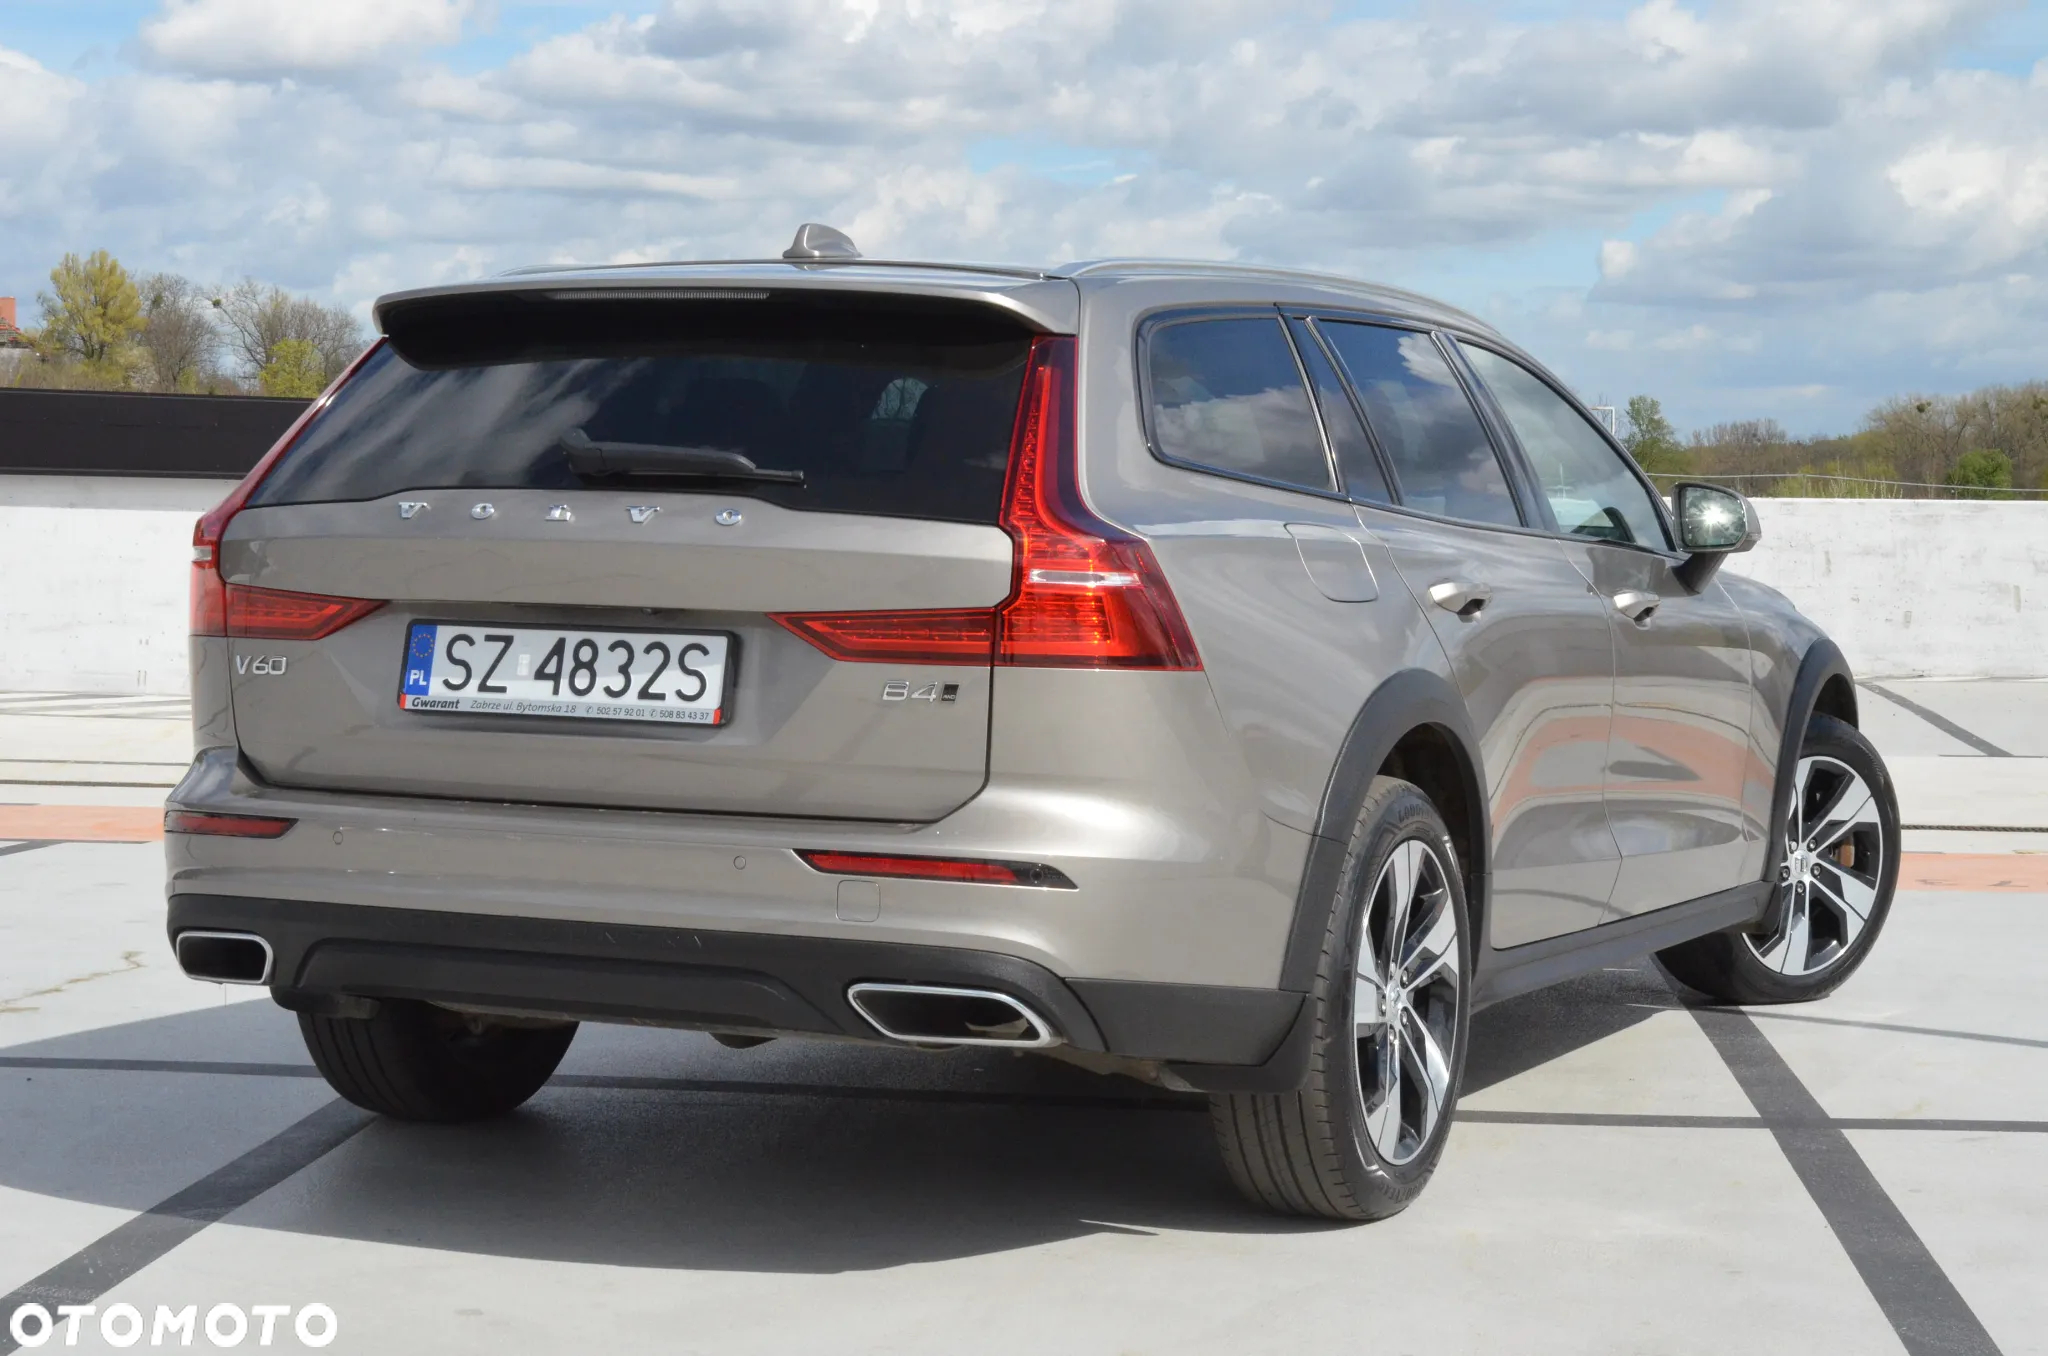 Volvo V60 Cross Country B4 D AWD Geartronic Pro - 19